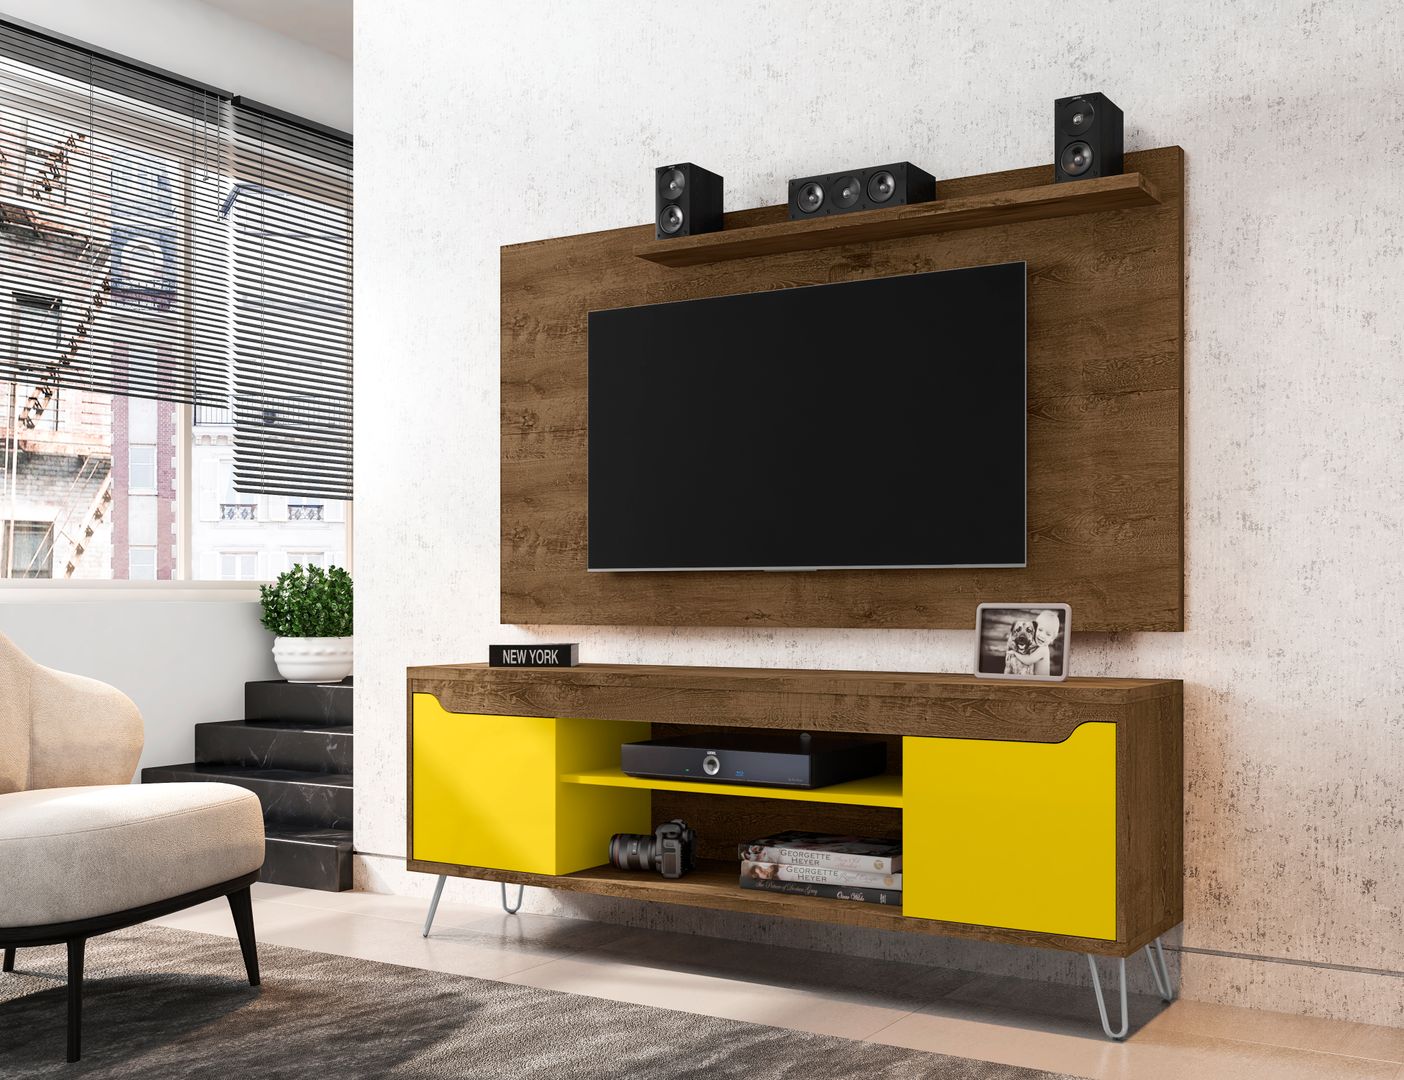 Manhattan Comfort Baxter 62.99 Mid-Century Modern TV Stand and Liberty Panel with Media and Display Shelves in Rustic Brown and Yellow